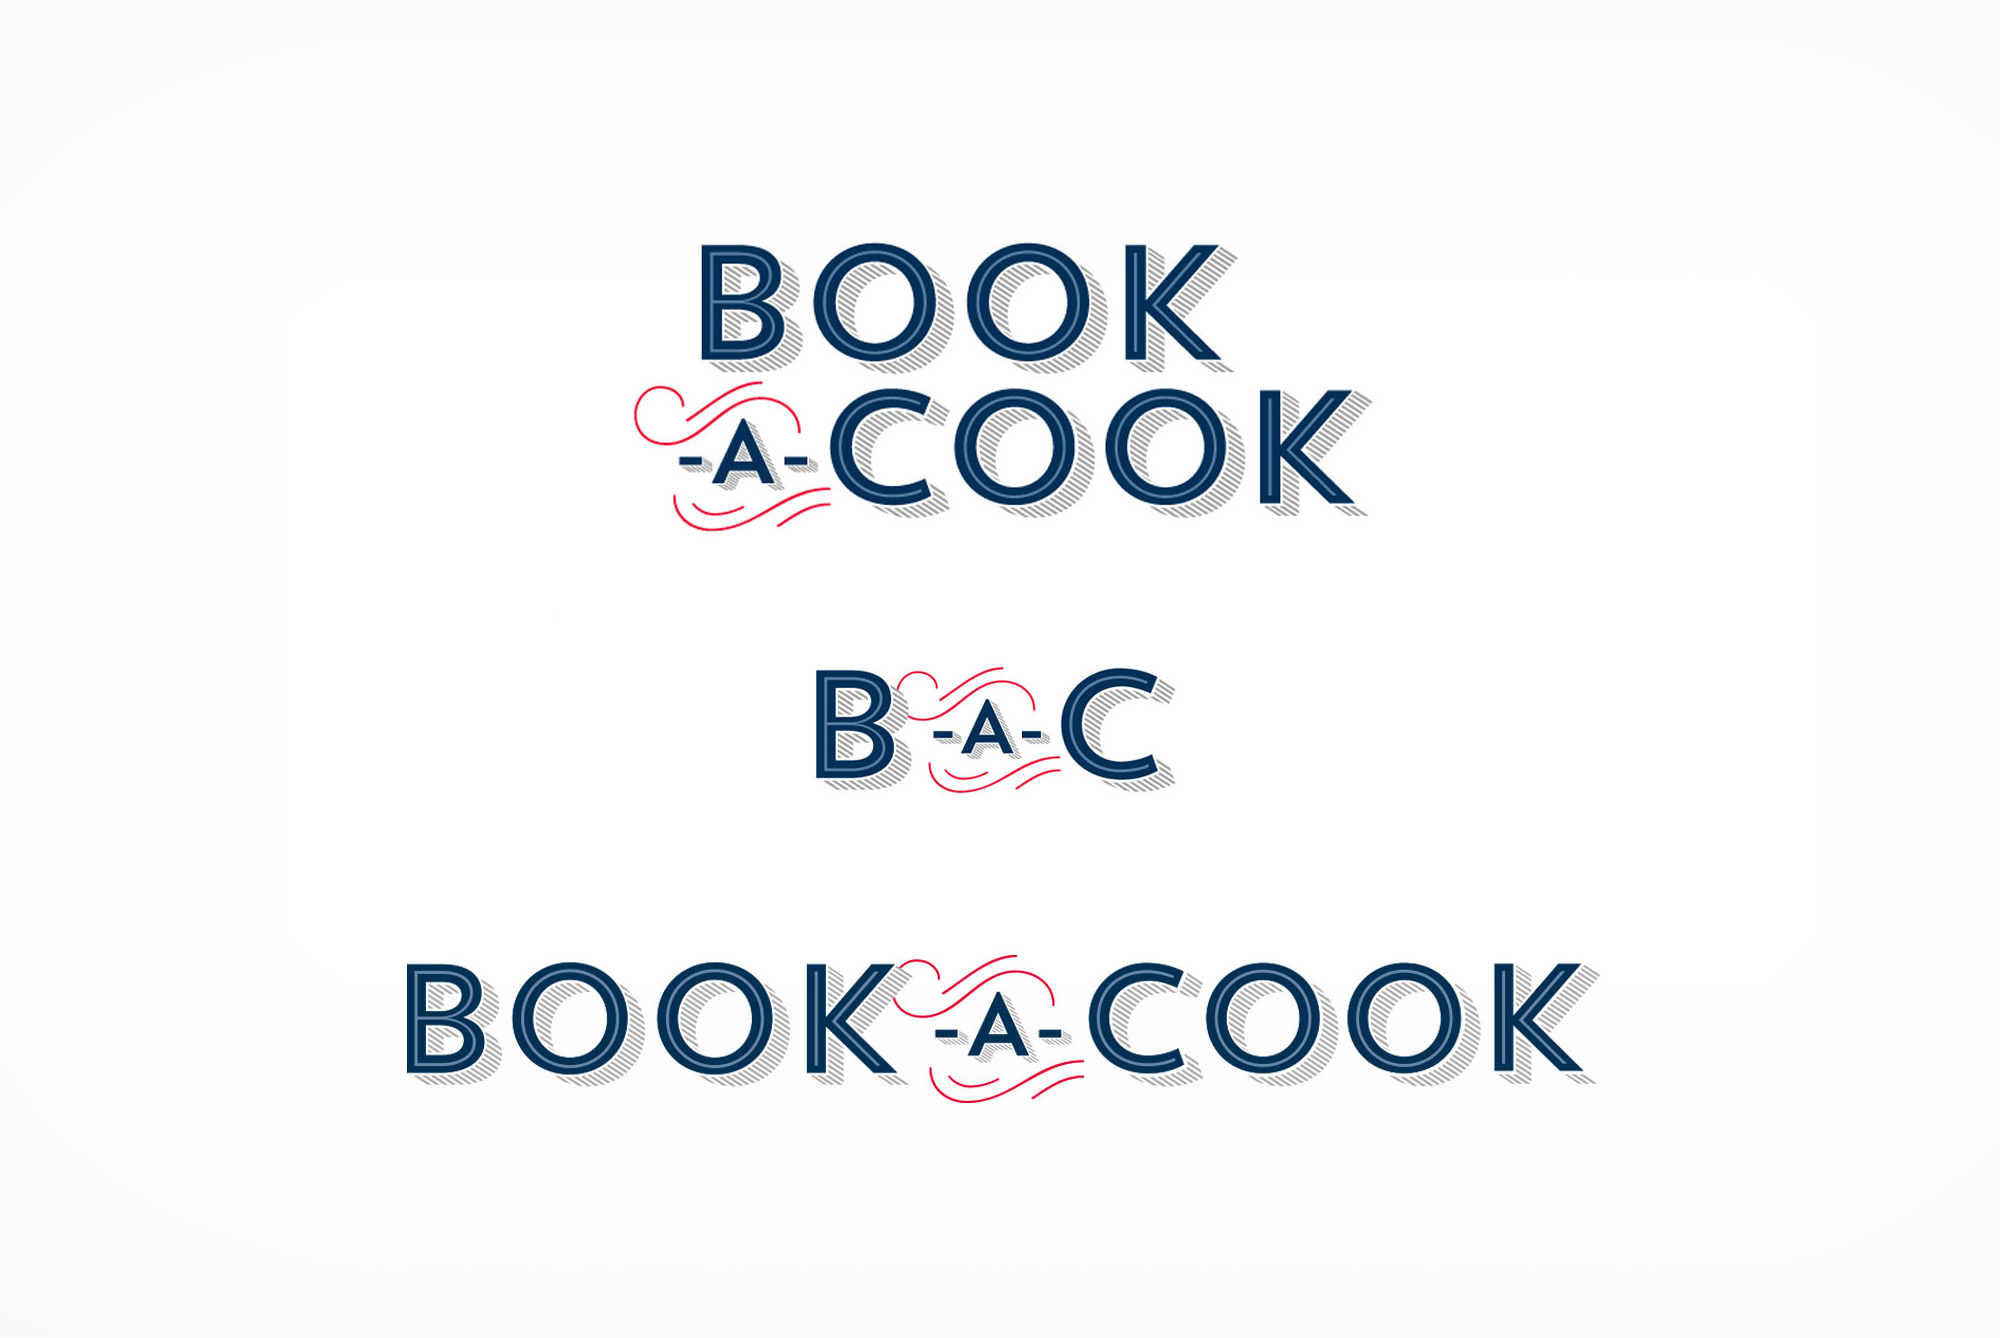 Reserve a table in your kitchen. Modern vintage logo design inspired by Betty Crocker herself.